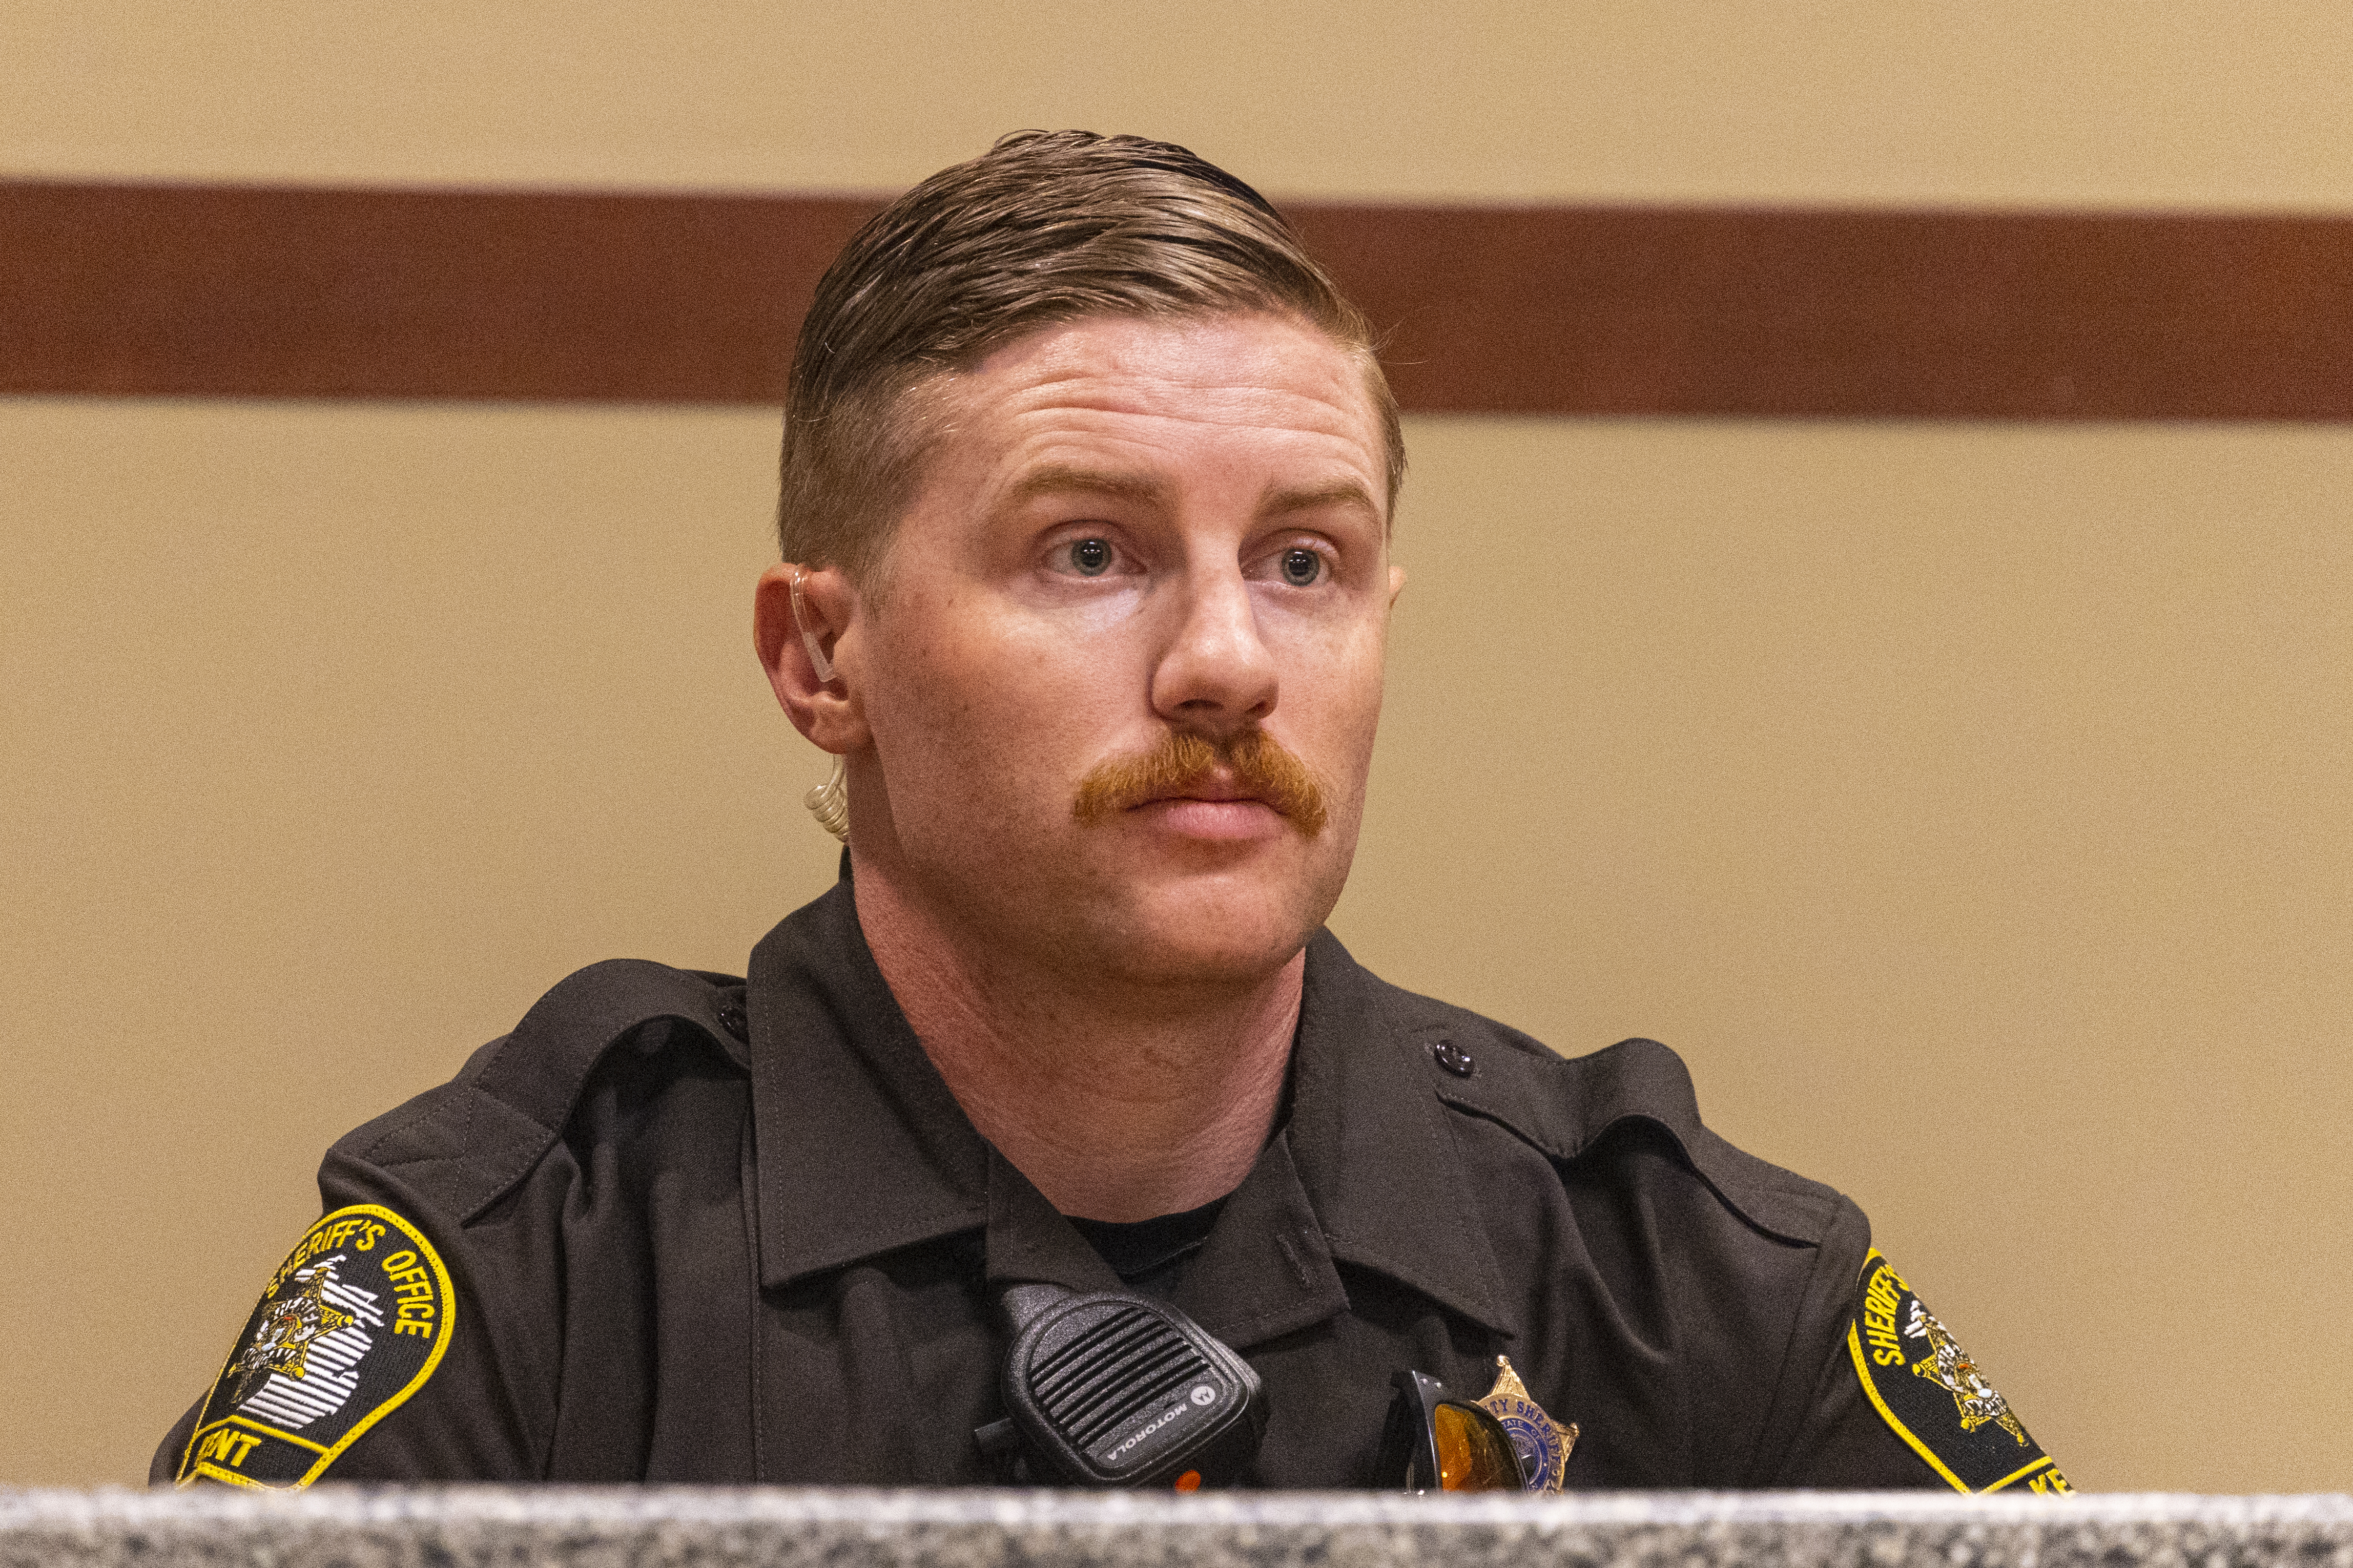 Kent County Sheriff's Deputy Andrew Bigen testifies during the preliminary examination for (not pictured) Rishy Manning, 22, Javonte Rosa, 23 and Jaheim Hayes-Goree, 20, at the 63rd District Courthouse in Grand Rapids, Michigan on Thursday, June 30, 2022. The trio of defendants who appeared in court, are charged with felony murder in the shooting death of Joseph Wilder, 50, who was shot and killed during a robbery attempt at a Huntington Bank ATM on South Division Avenue in May of 2022. (Joel Bissell | MLive.com)